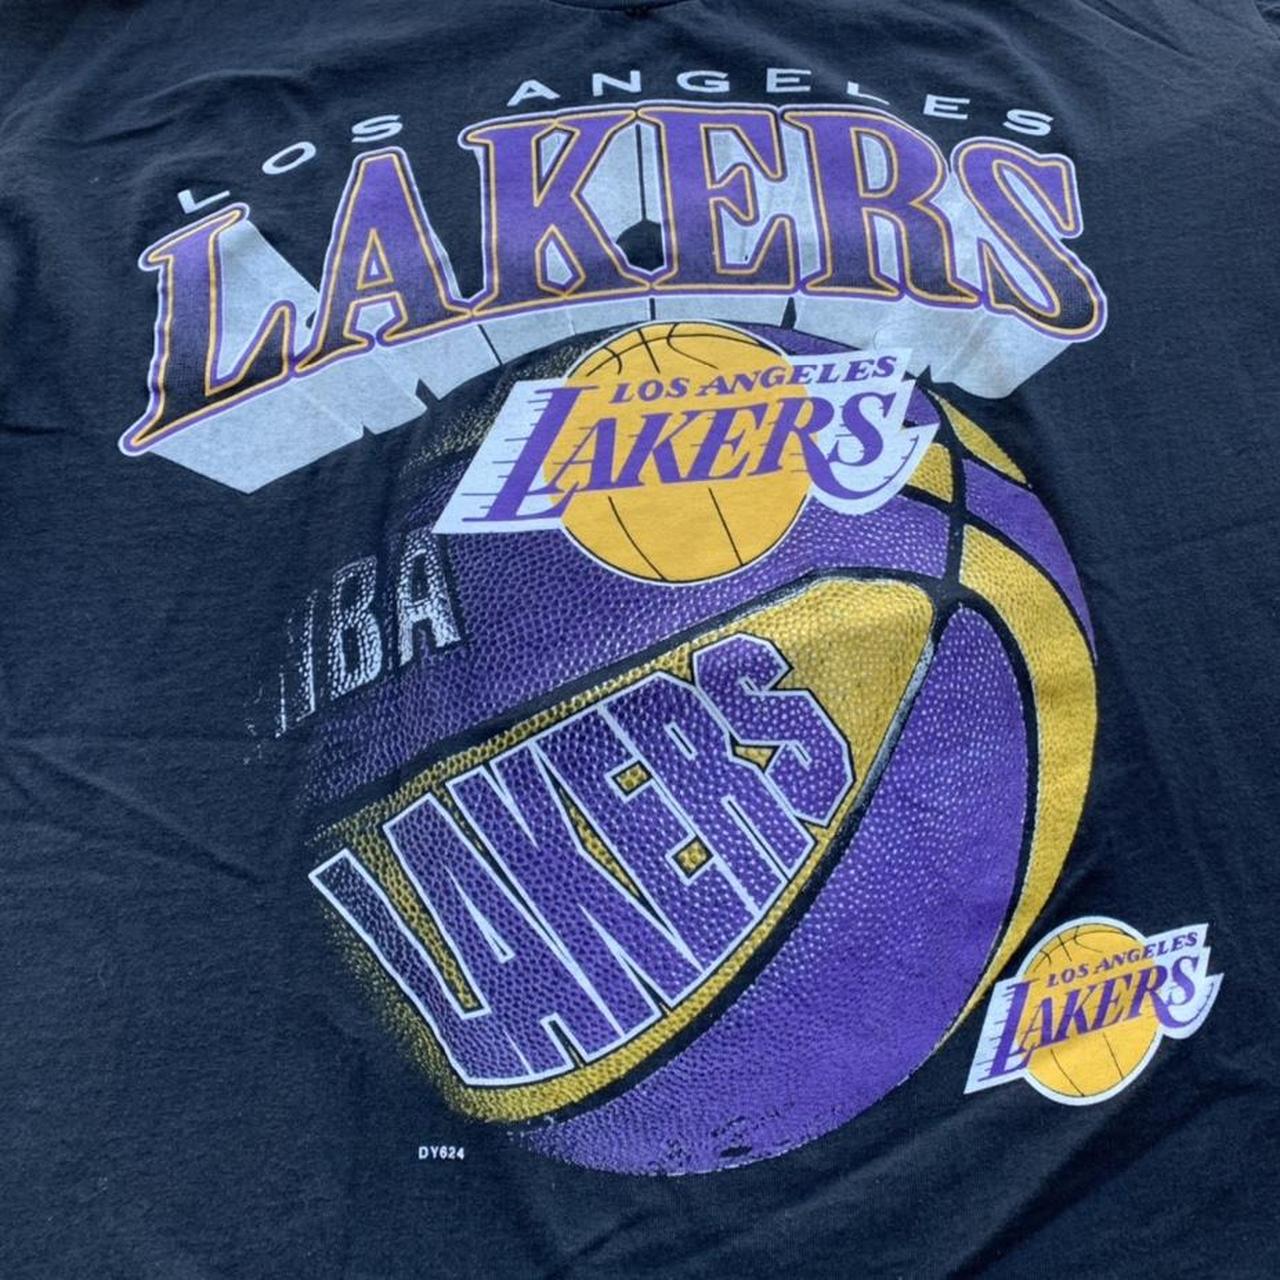 Vintage 1988 Lakers Shirt. The shirt is in good - Depop